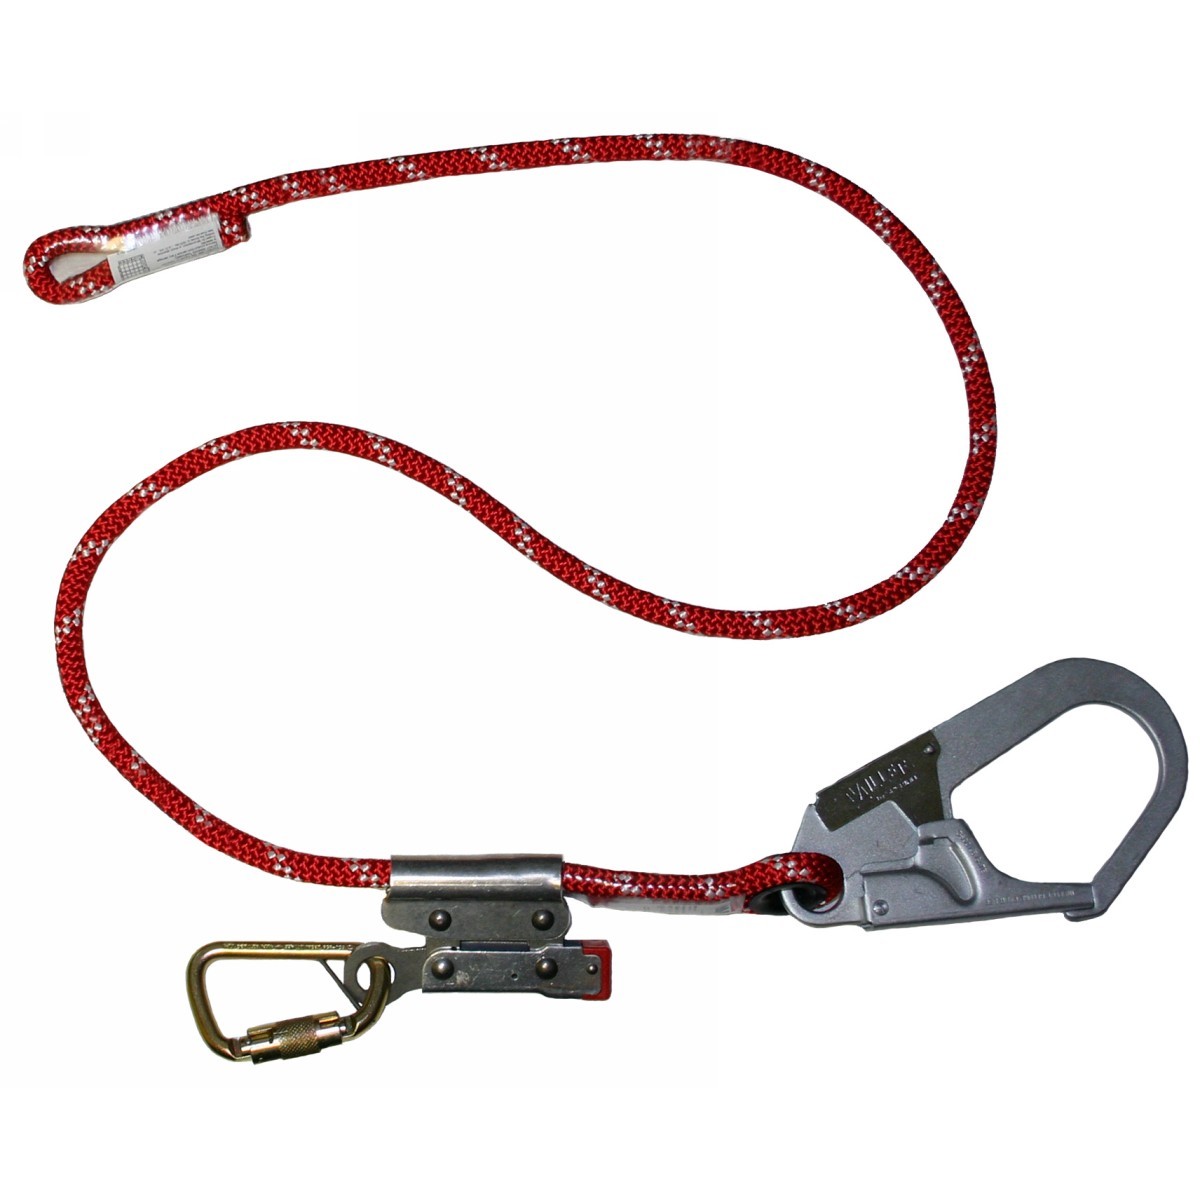 Honeywell Miller® 6' Kernmantle Positioning Lanyard With Captive Eye Carabiner Harness Connector